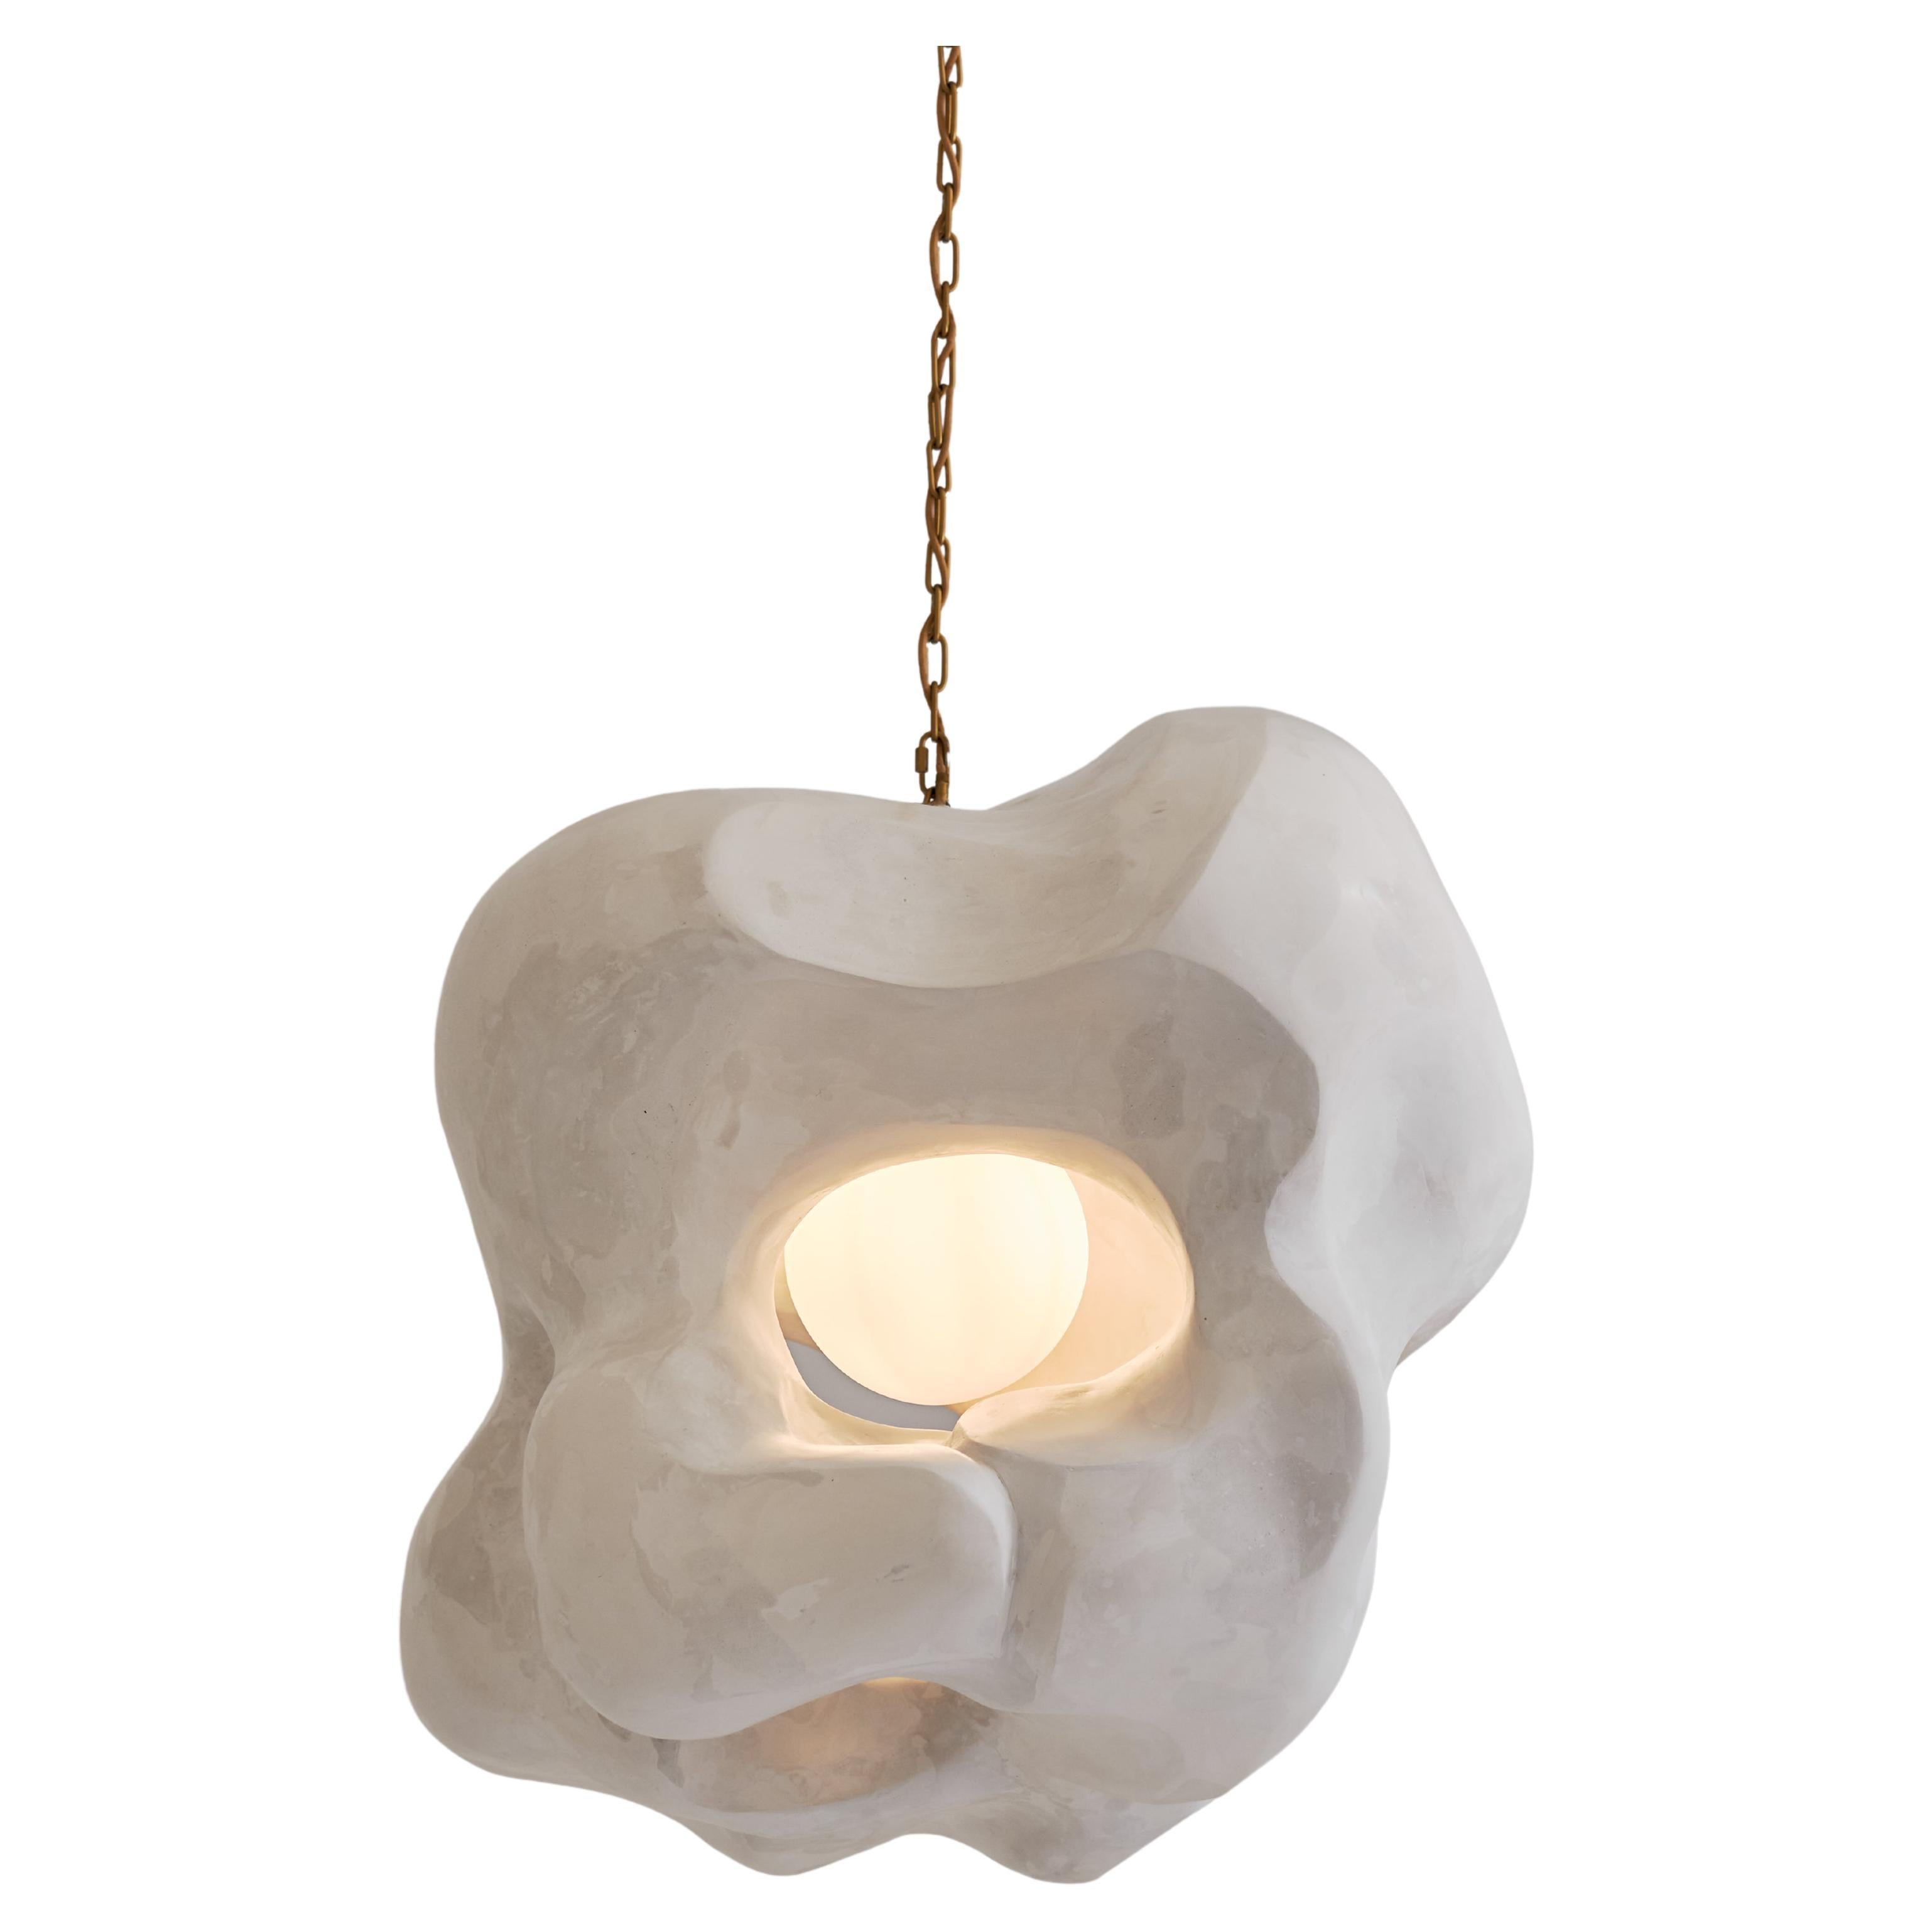 Large Contemporary Pendant Light, Sculptural Collectible Design "Ikigai" by AOAO